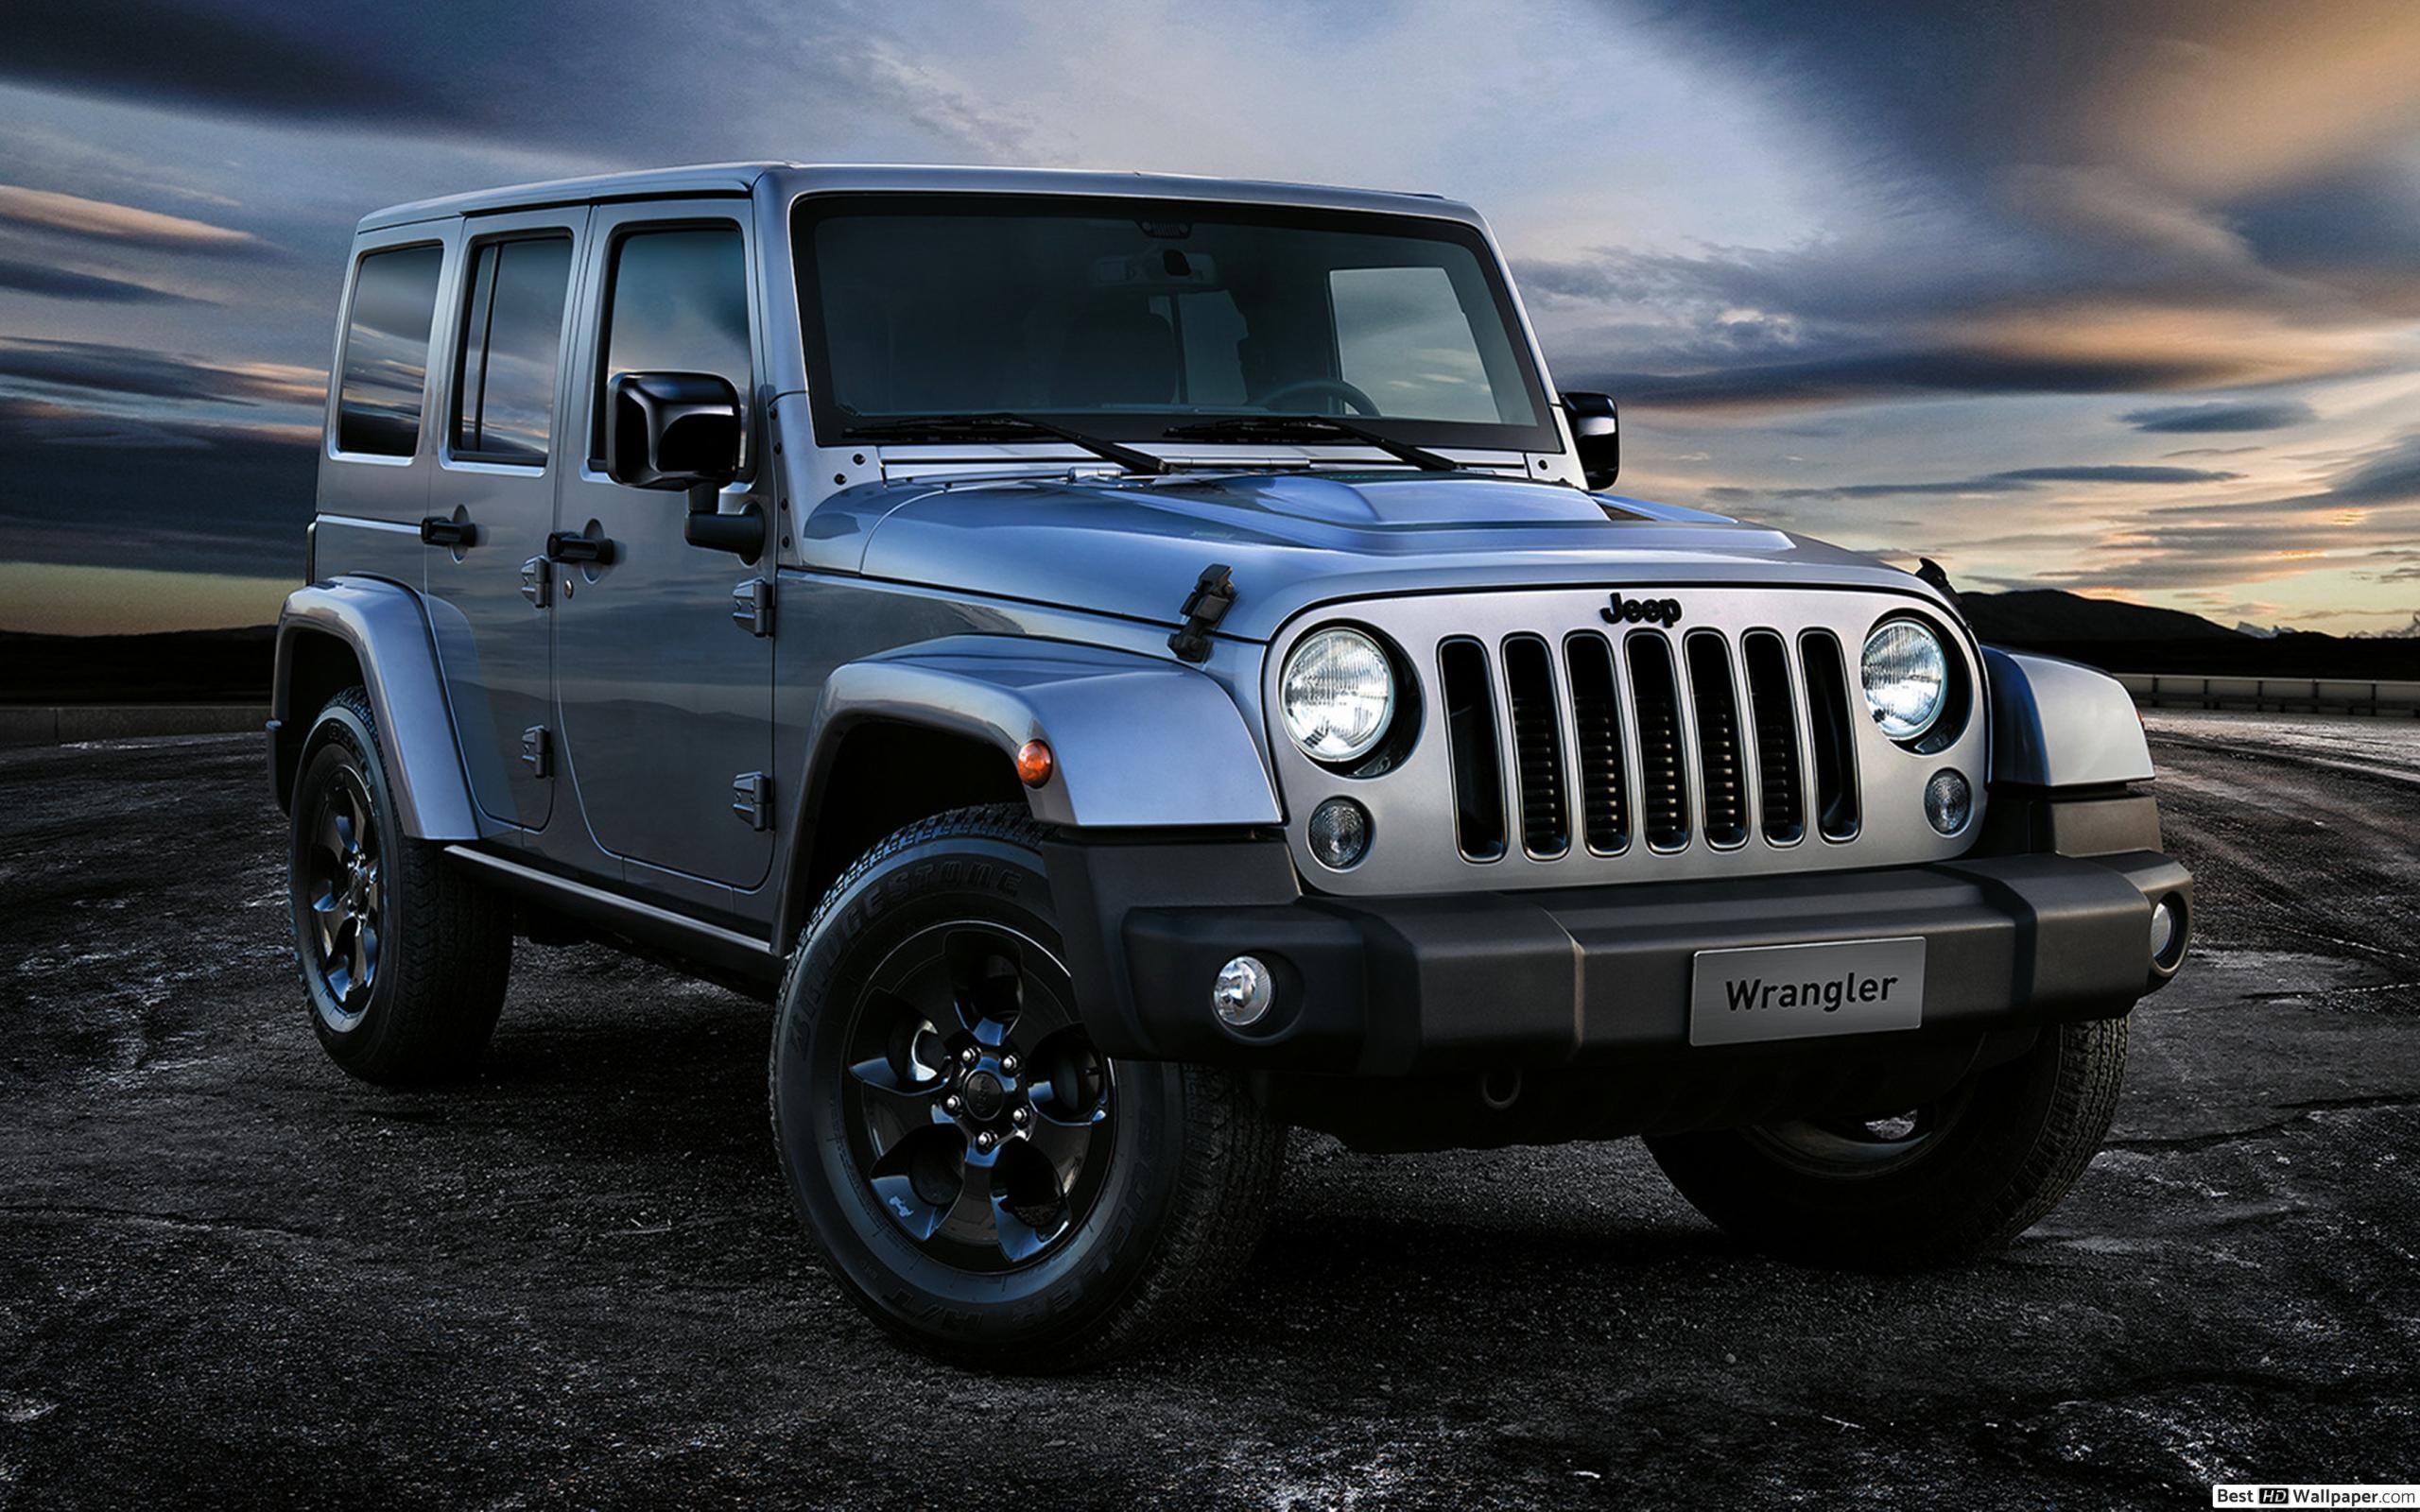  Blue  Jeep  Wallpapers  Wallpaper  Cave